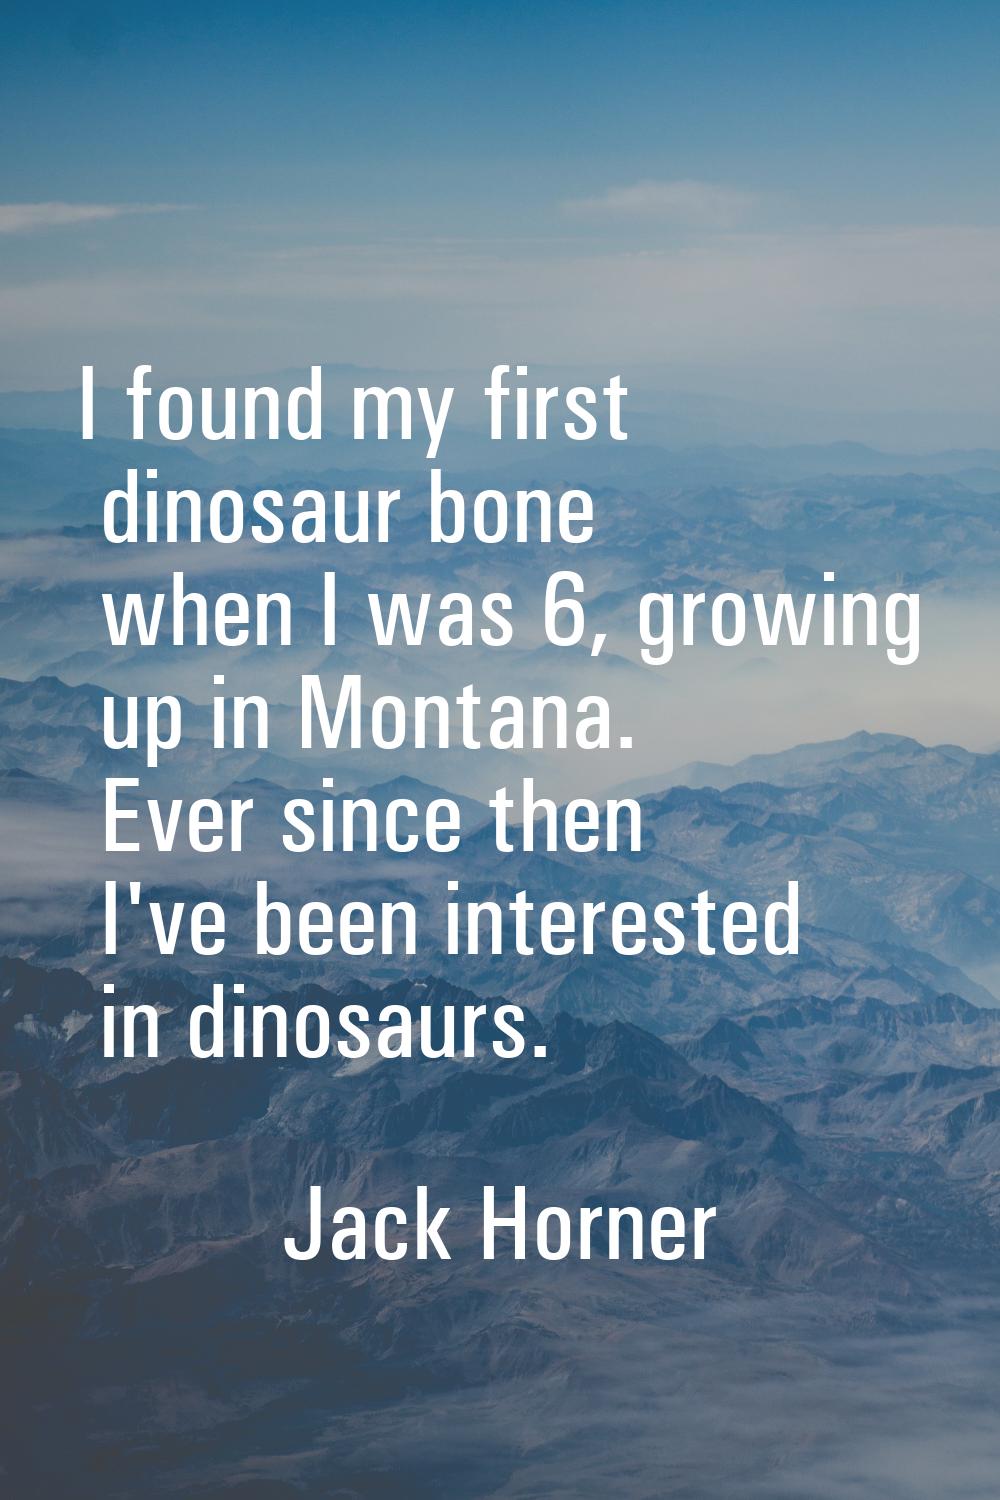 I found my first dinosaur bone when I was 6, growing up in Montana. Ever since then I've been inter